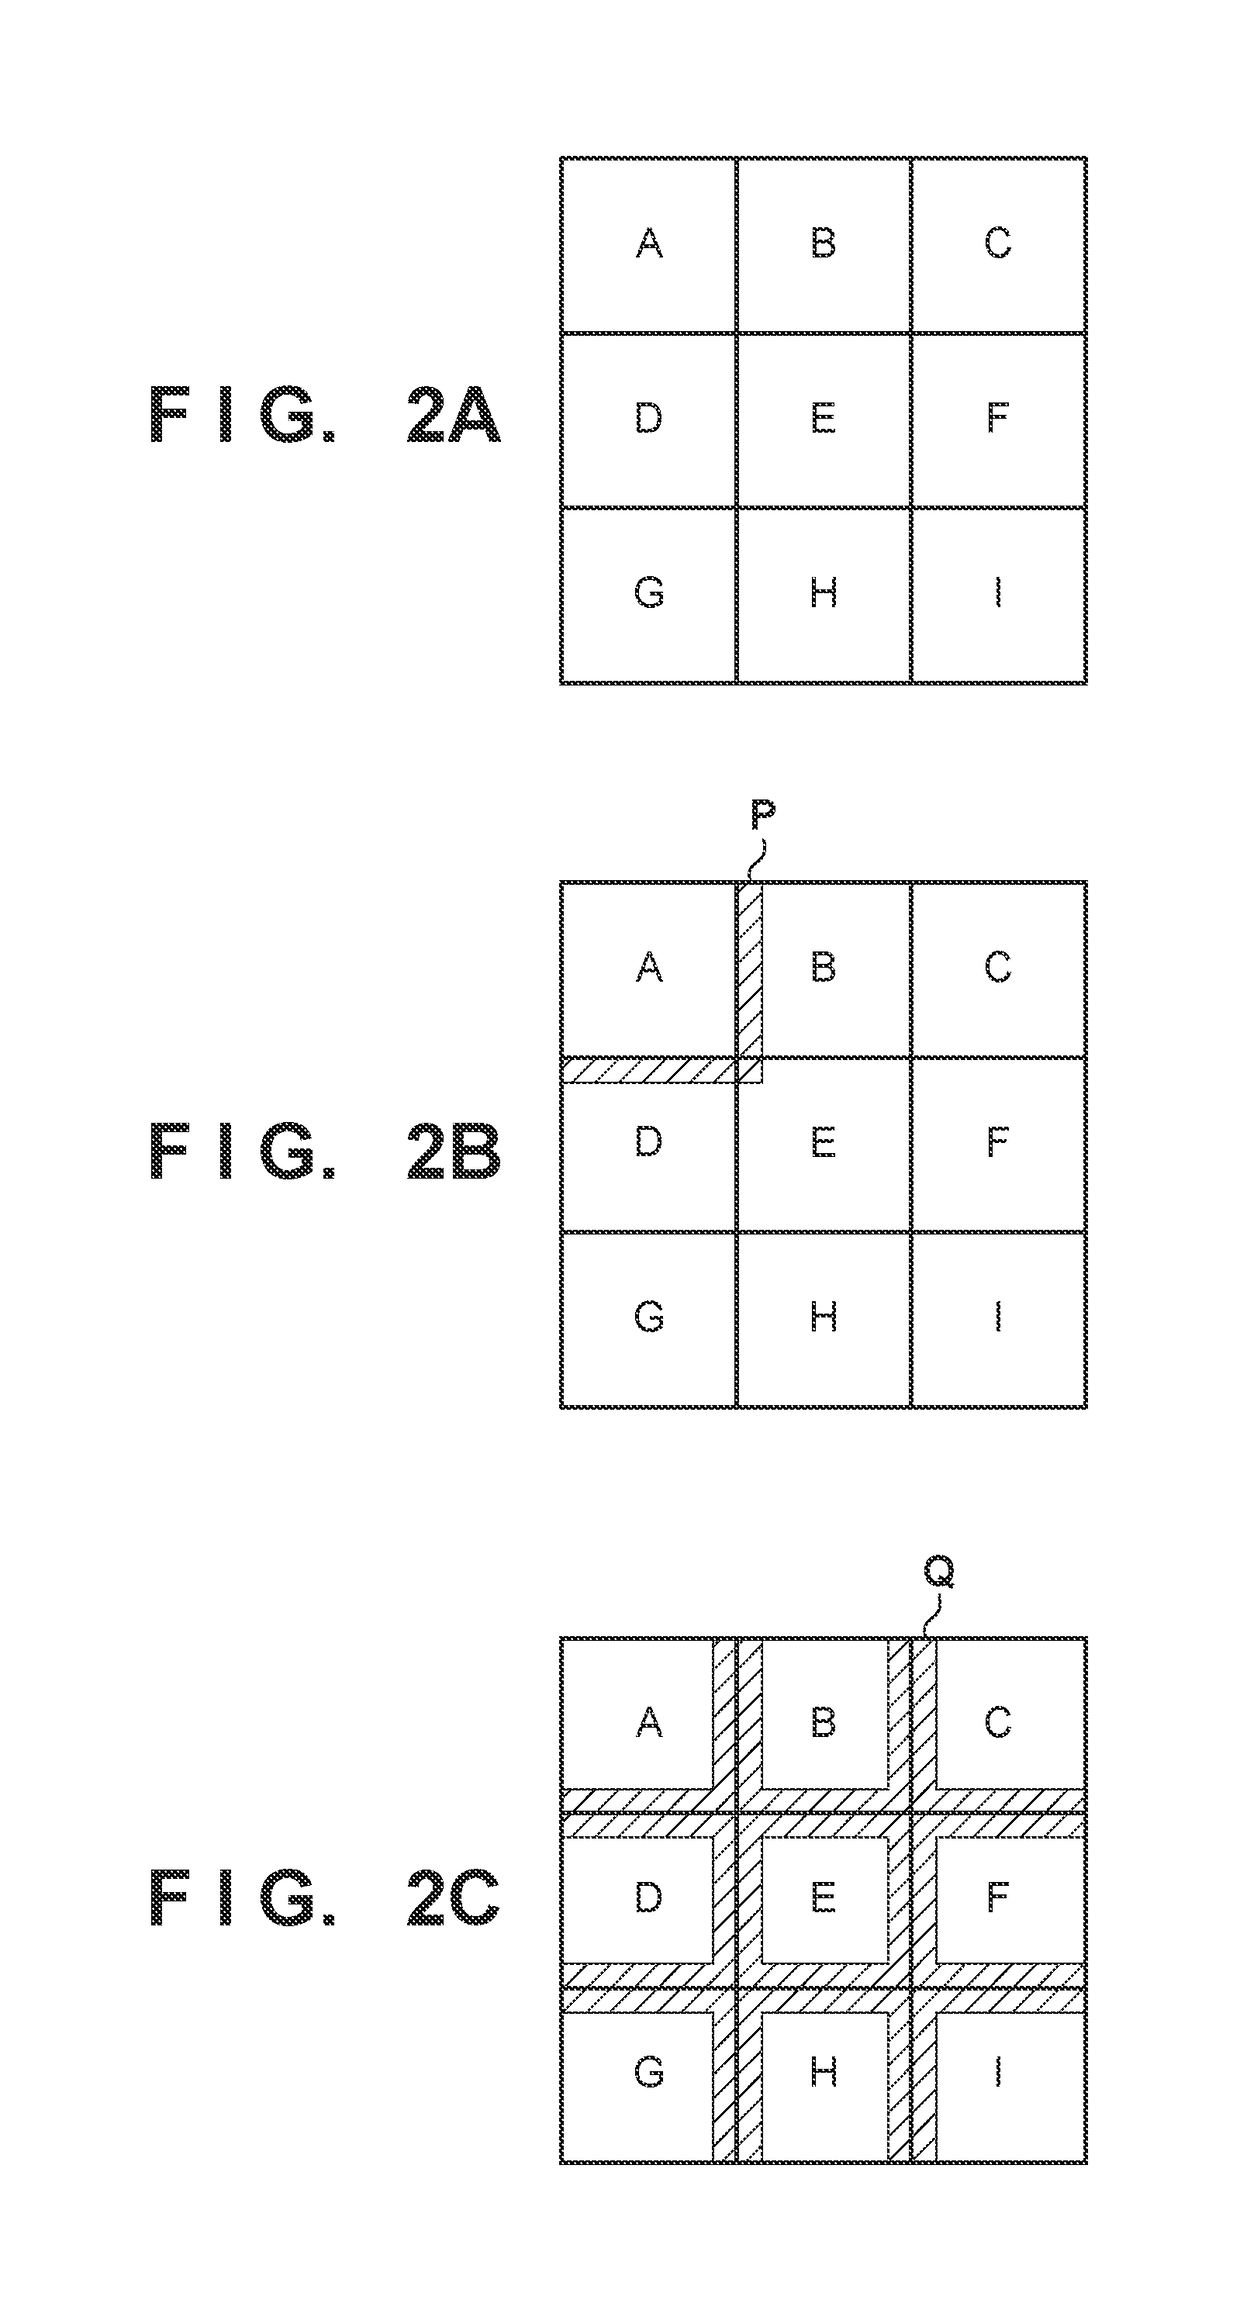 Image encoding apparatus and method of controlling same